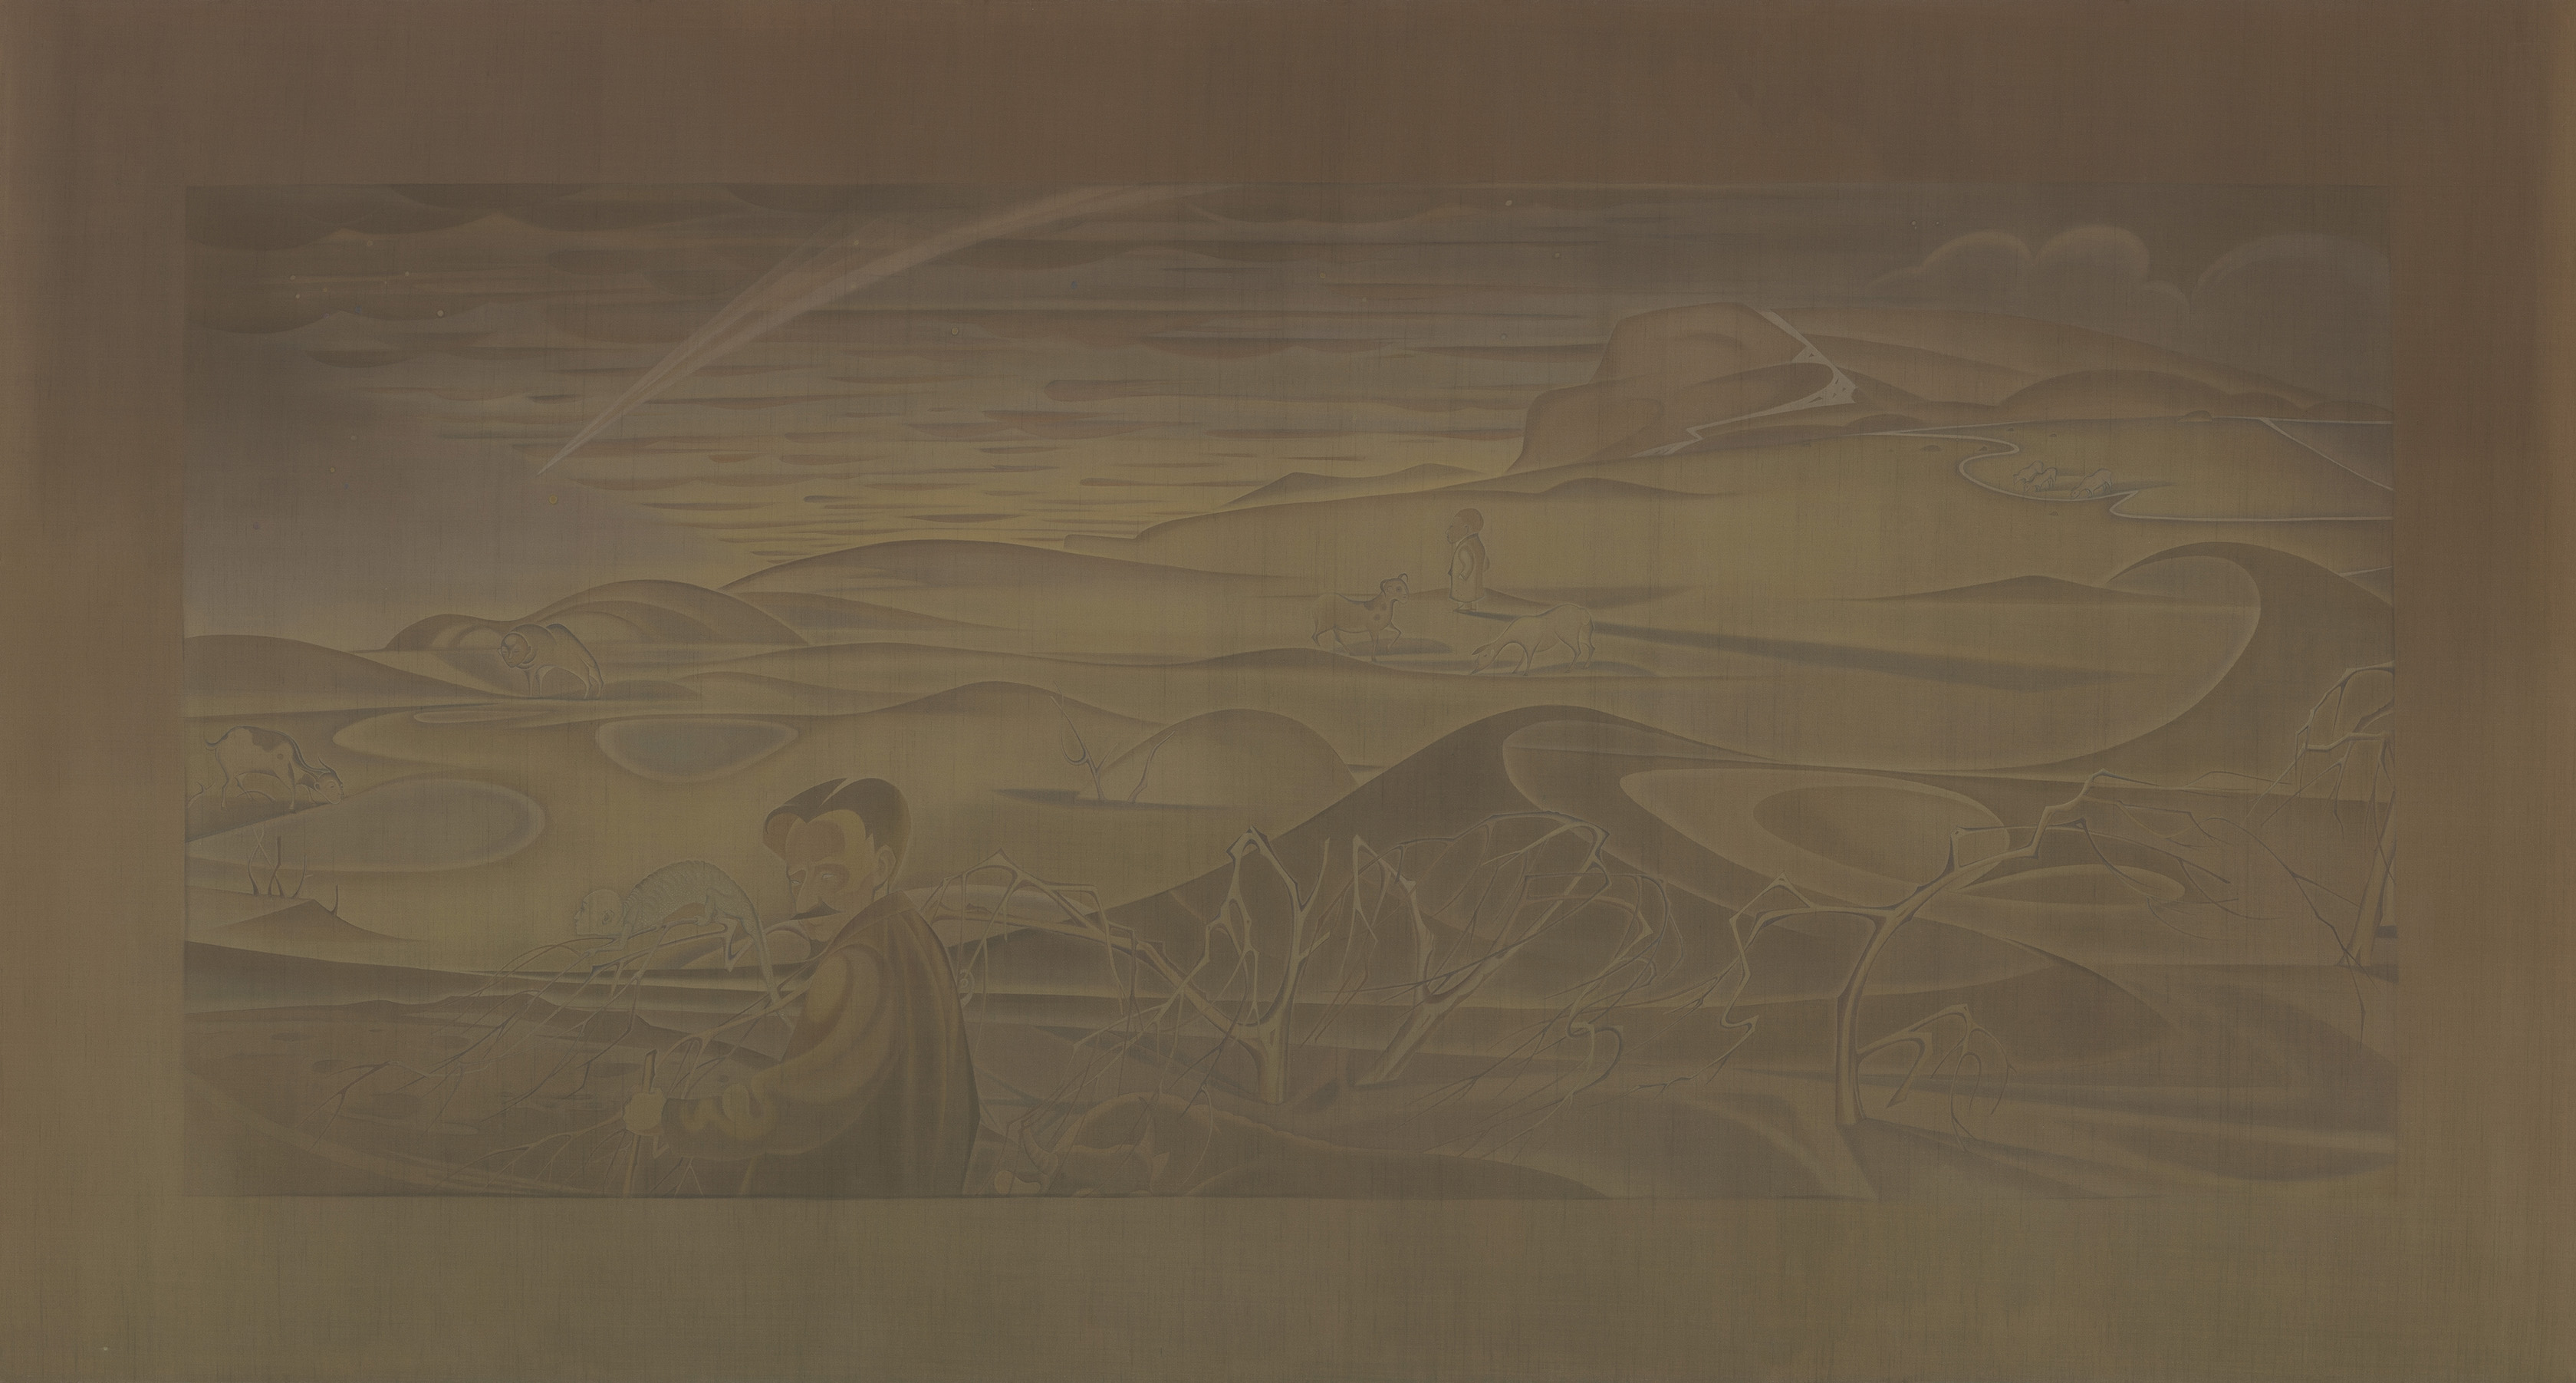 About the Artwork Hao Liang, Suite. Autumn Thoughts — Dawn, Ink and Color on Silk, 2020  by Hao Liang